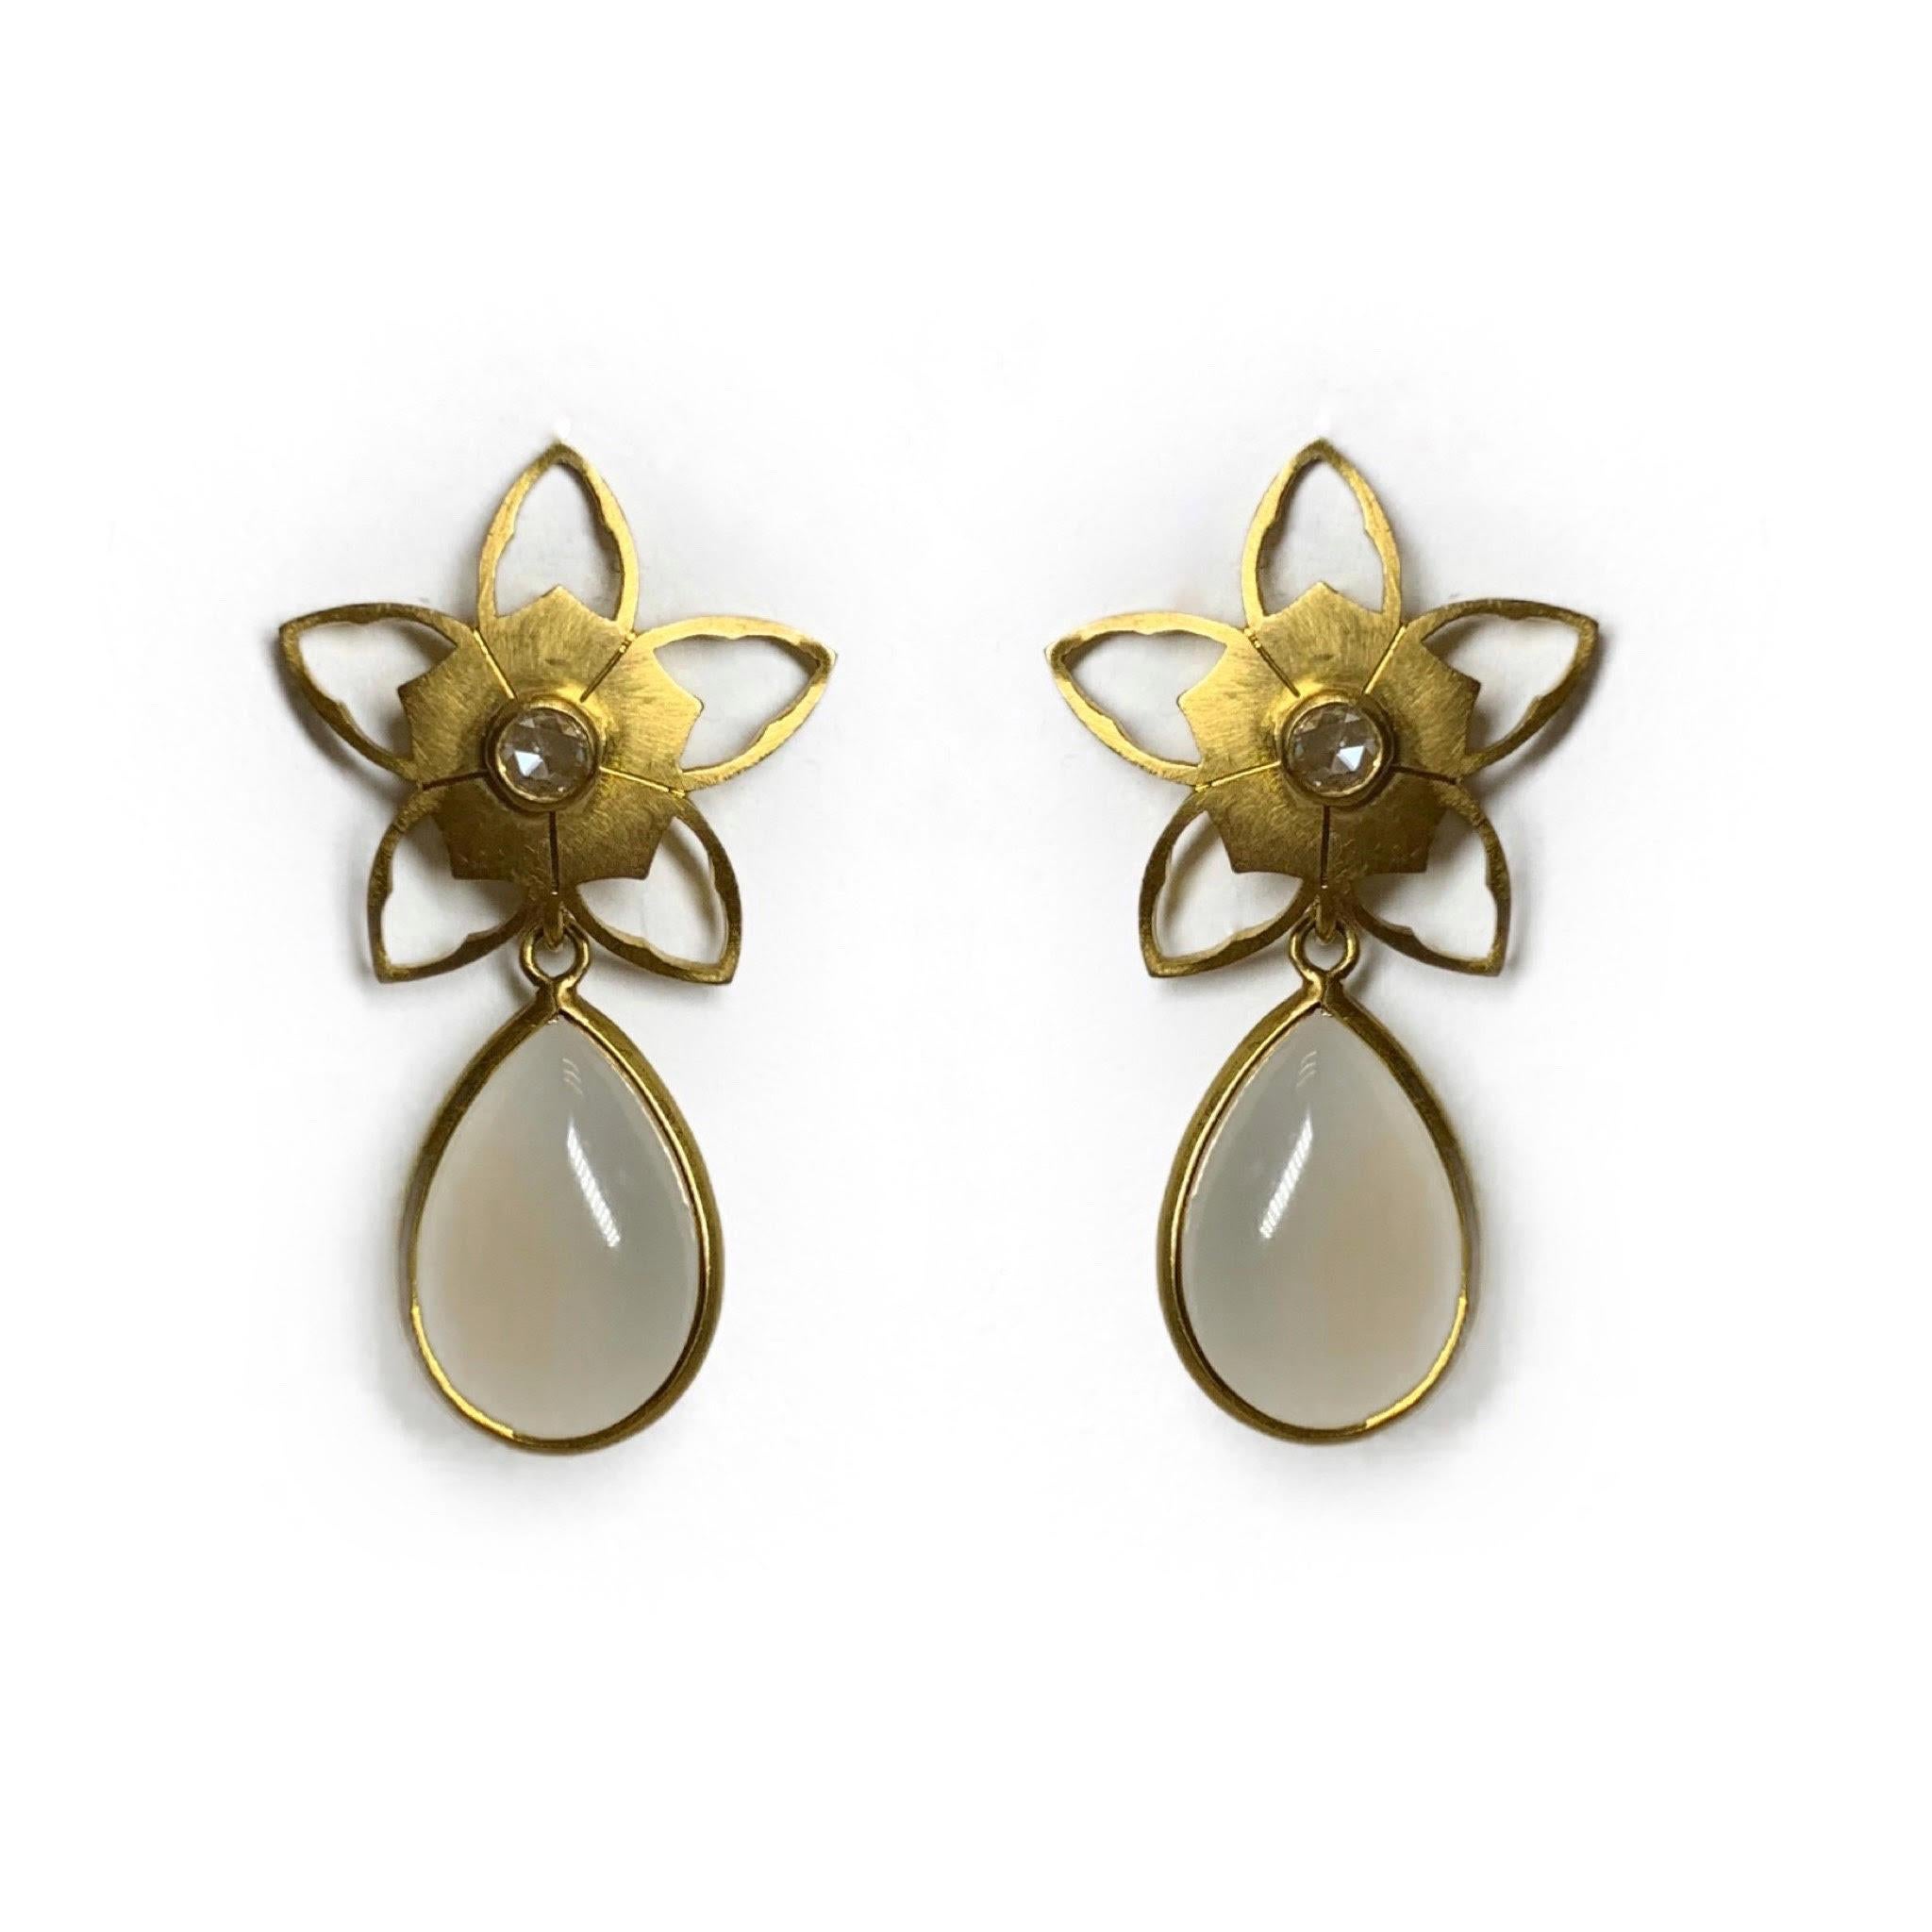 Contemporary 5 Petal Diamond Flower with Detachable Earrings in 18 Karat Gold, A2 by Arunashi For Sale